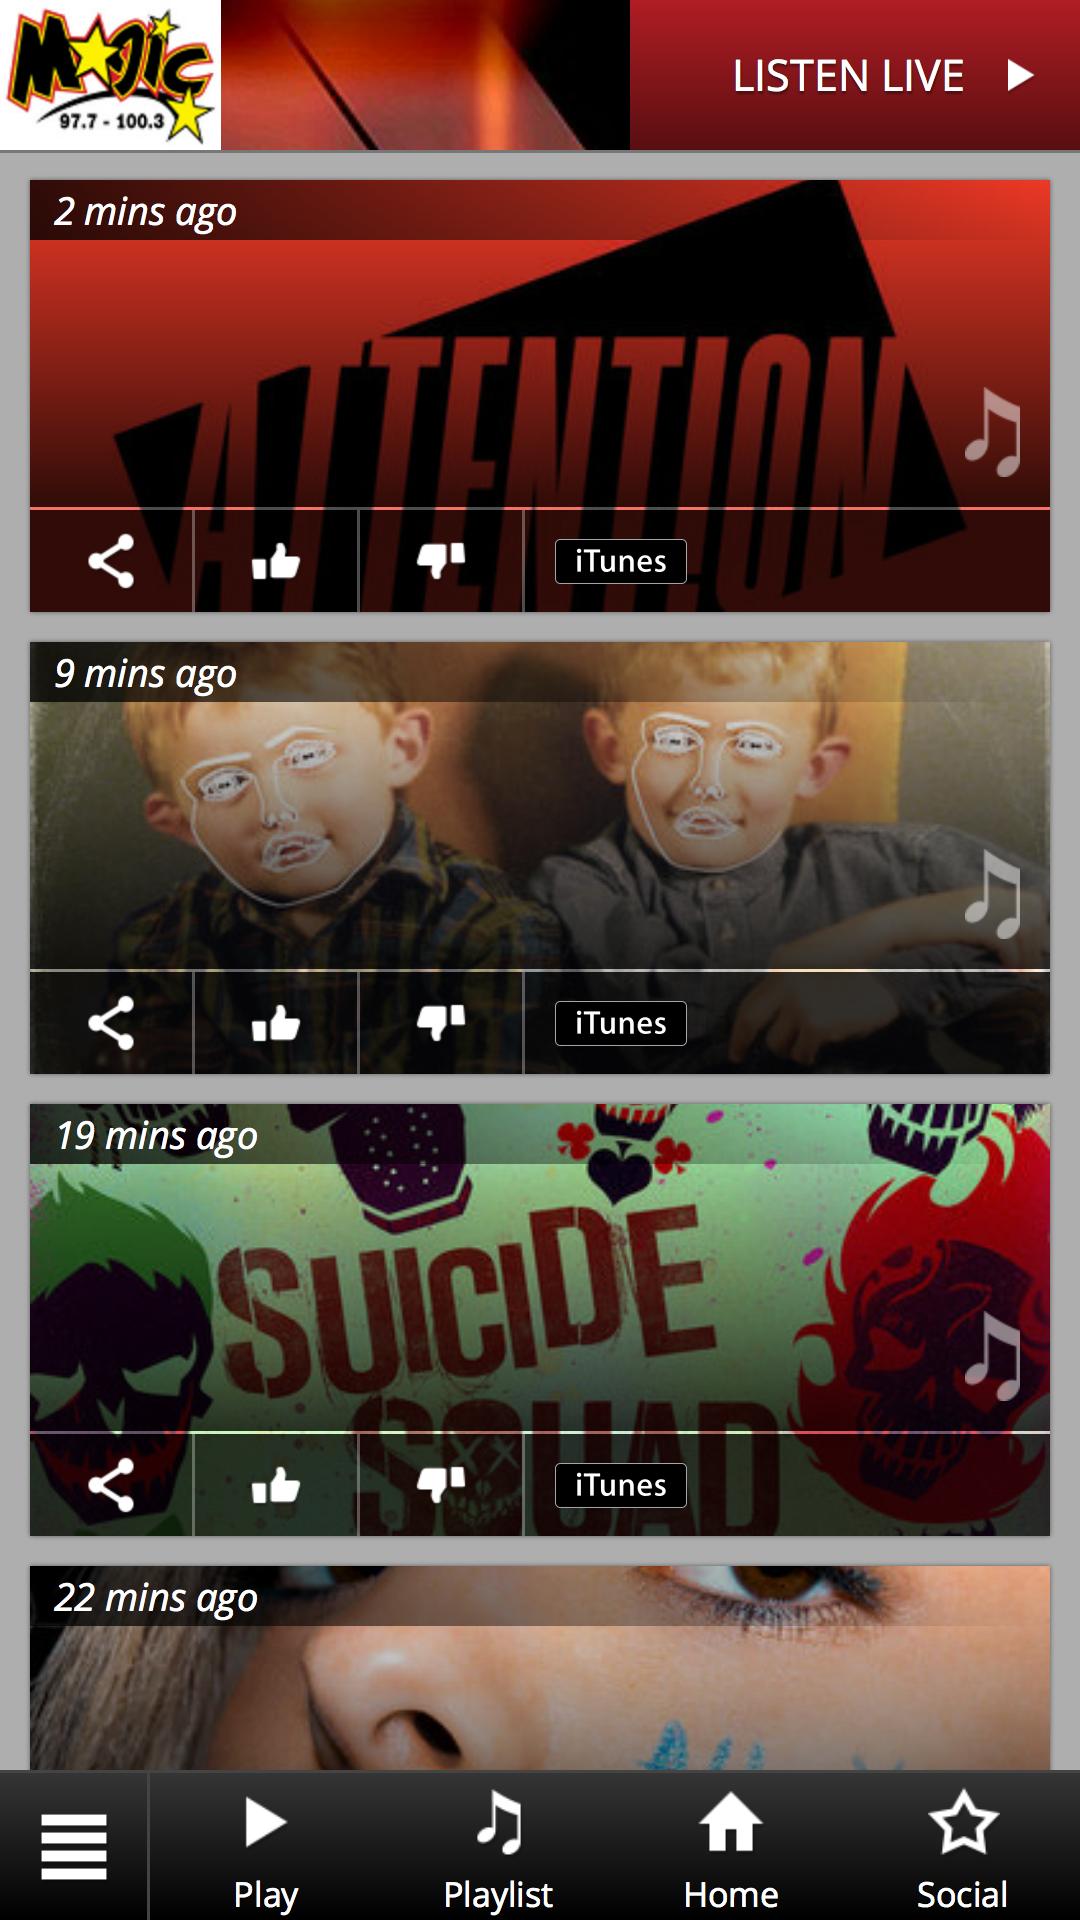 Magic 97.7 for Android - APK Download